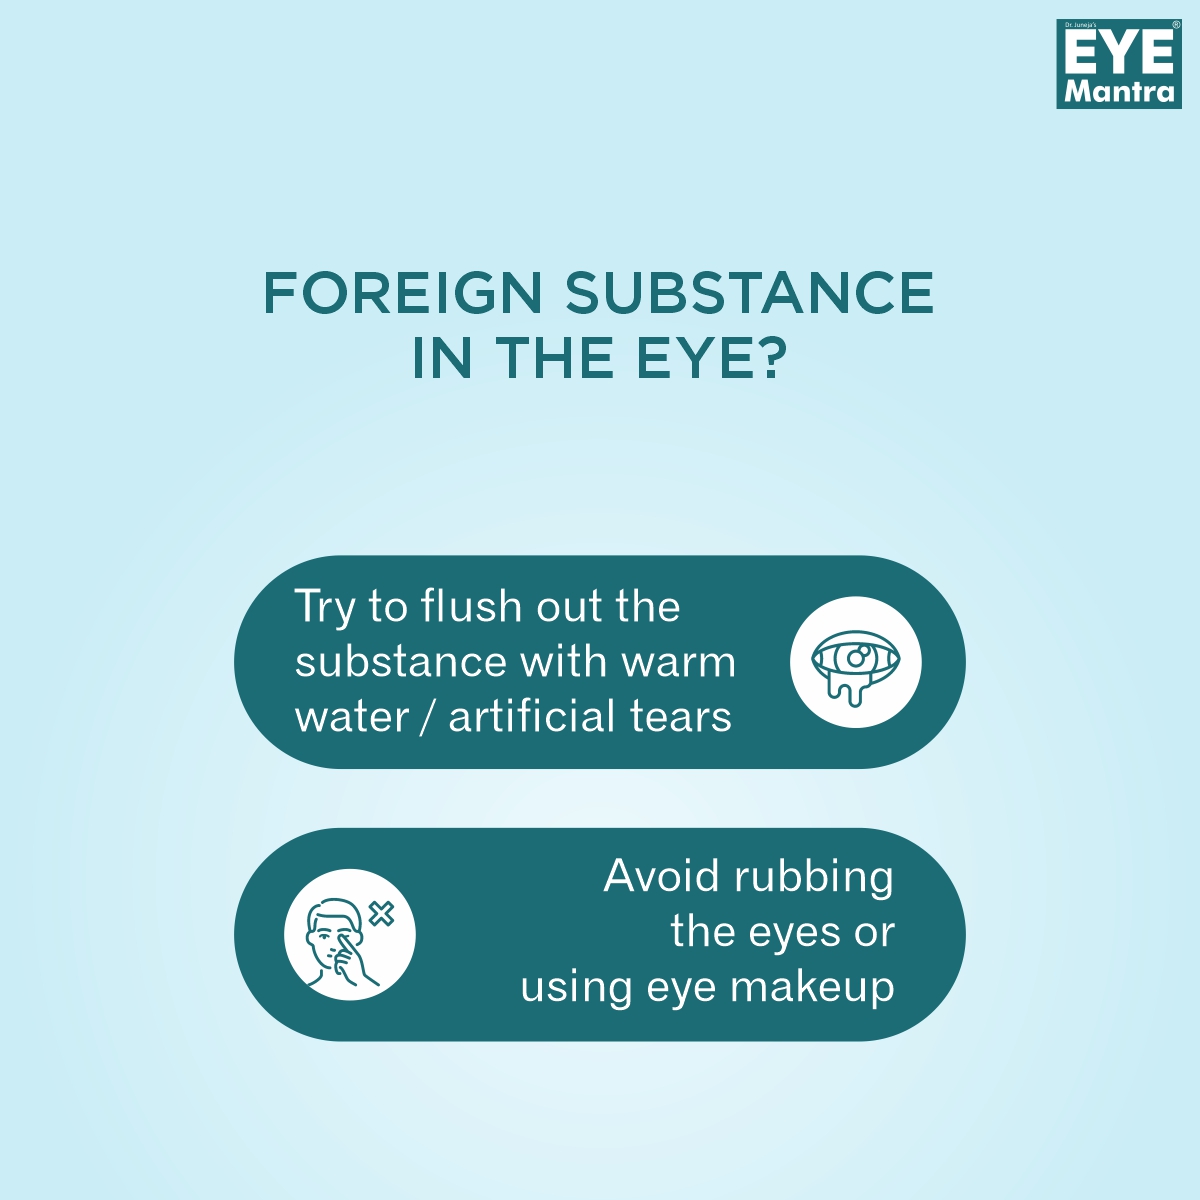 Whenever we feel something inside our eyes, our first response is to rub them. But stop! as it can be damaging. Instead, use a cold compress and water to flush out the debris.

#EyeMantra #healthyeyes #eyecaretips #eyecareforall #EyeDiscomfort #coldcompress #AyurvedicEyeDrops